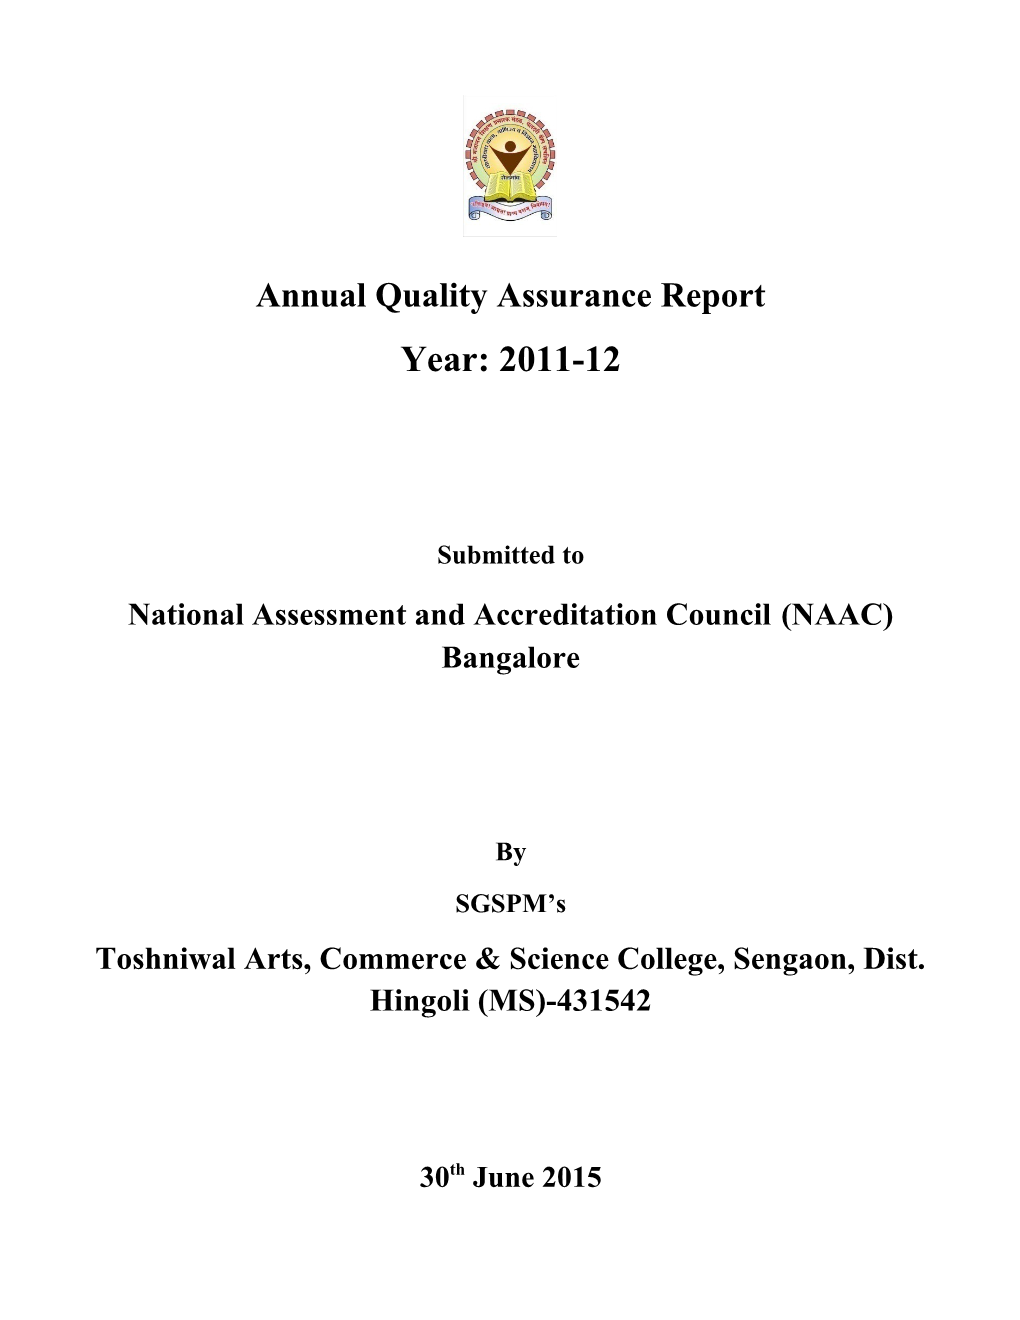 Annual Quality Assurance Report: 2011-12